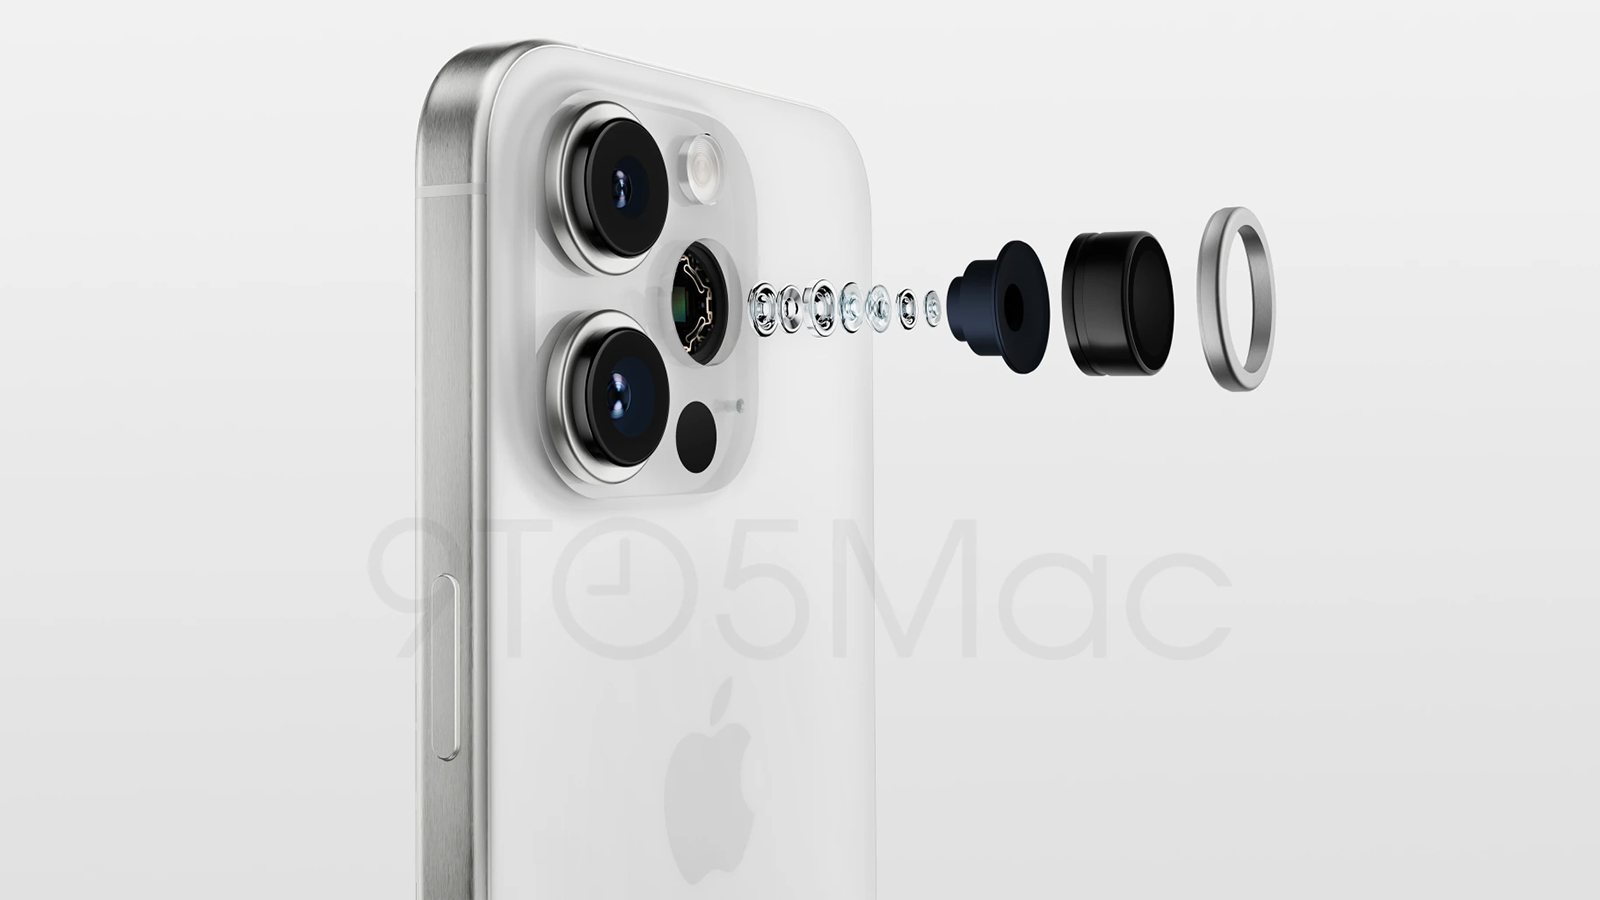 iPhone 15 Pro leak showing the phone in white with an extended rear camera section